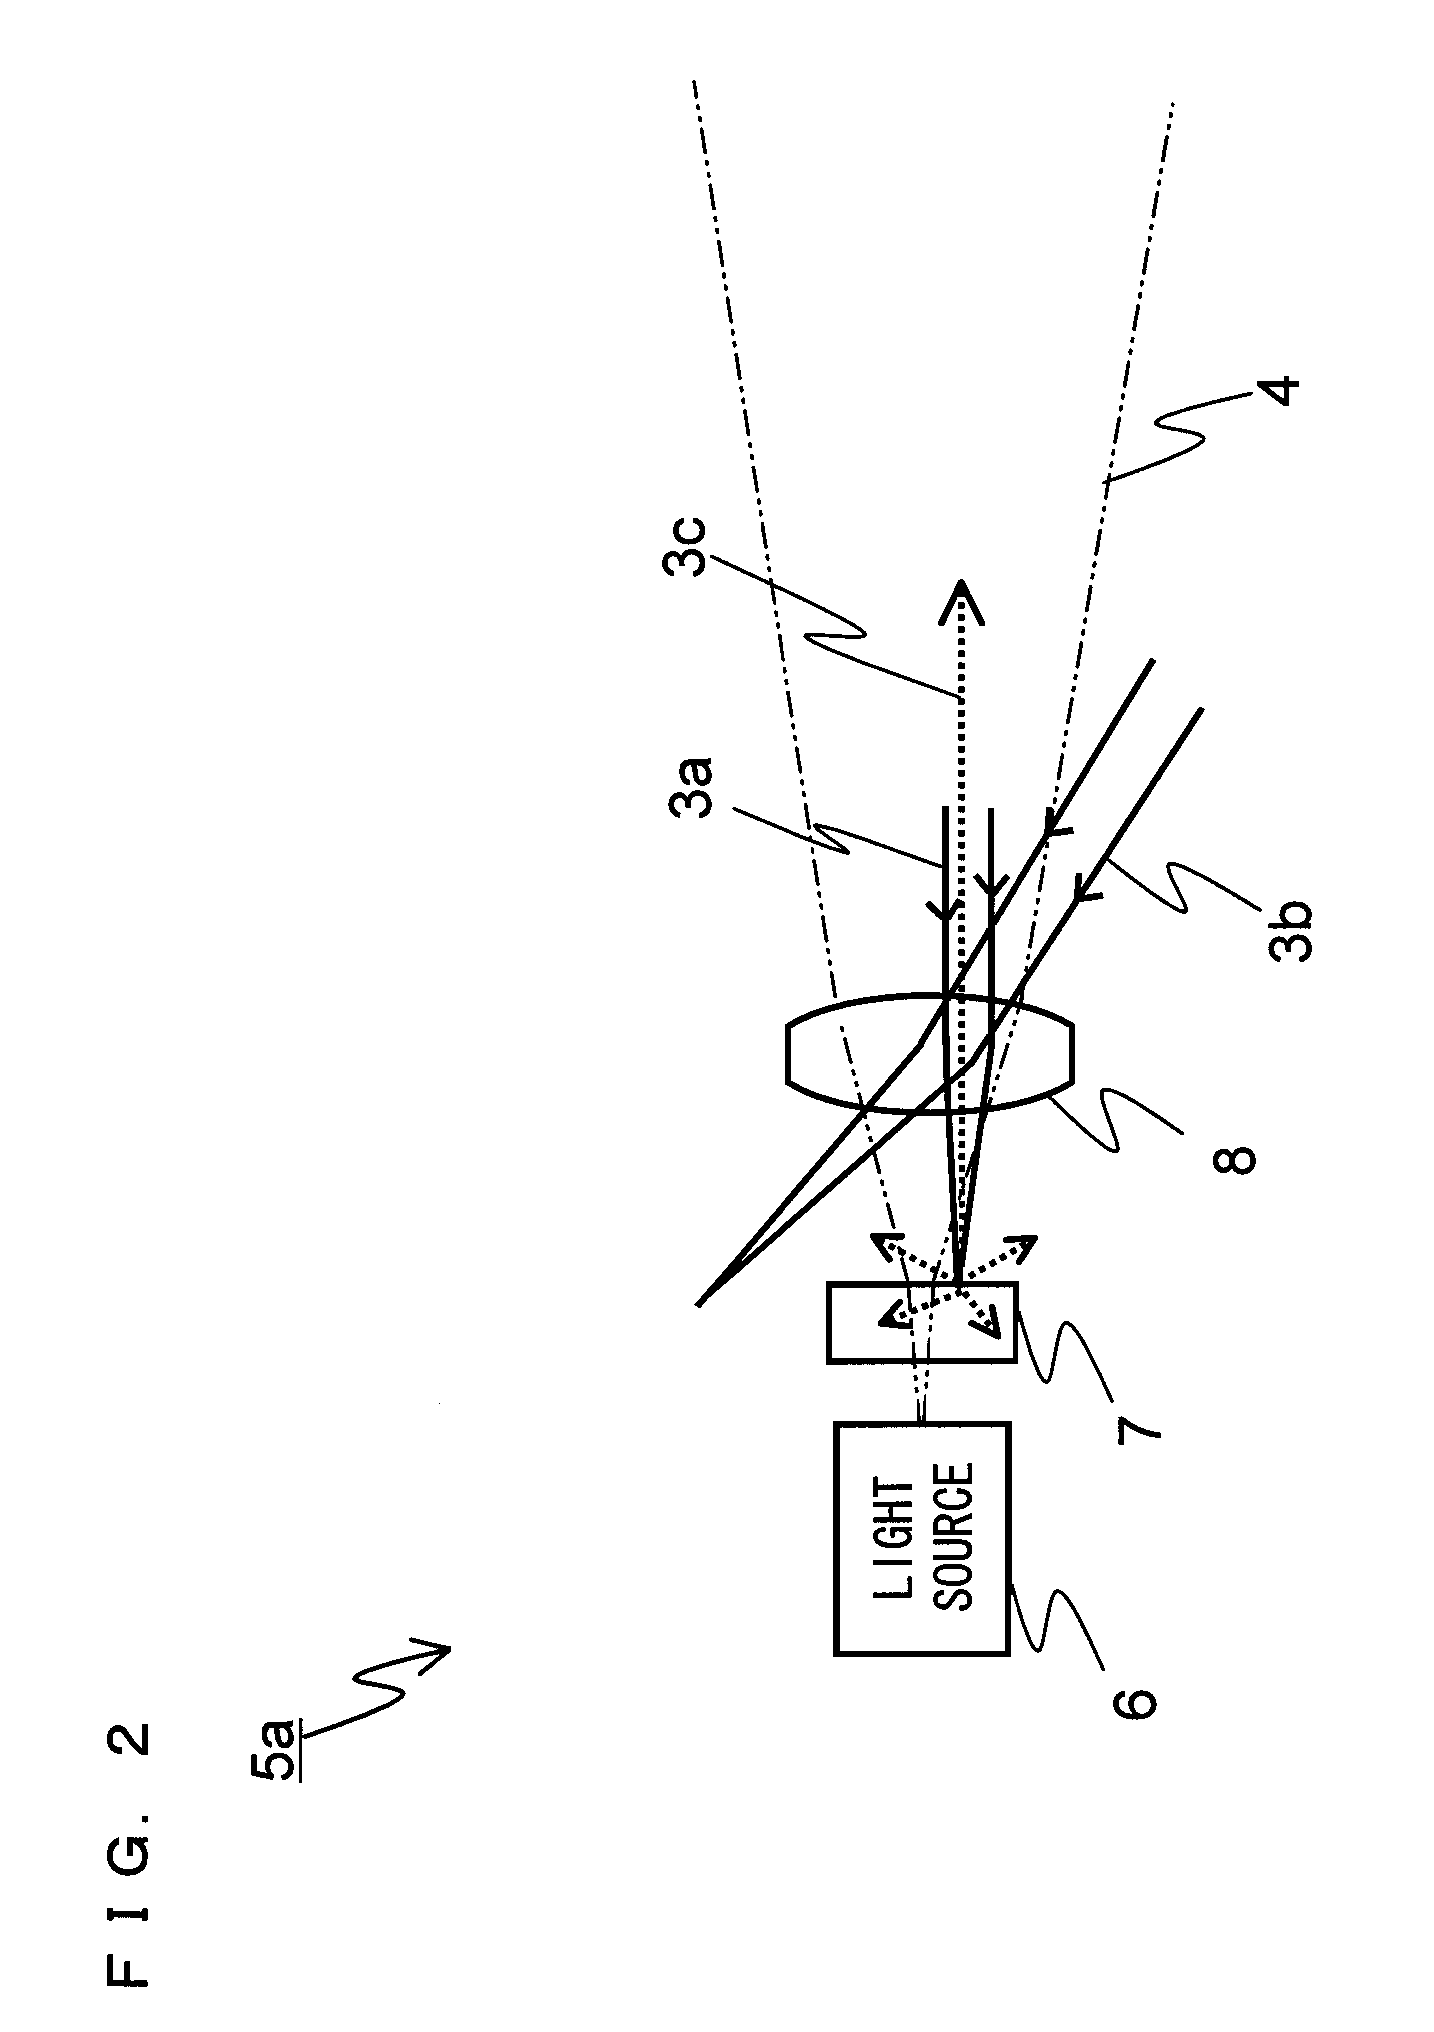 Optical wireless transmission system for performing optical space transmission, and optical transmitter used therein